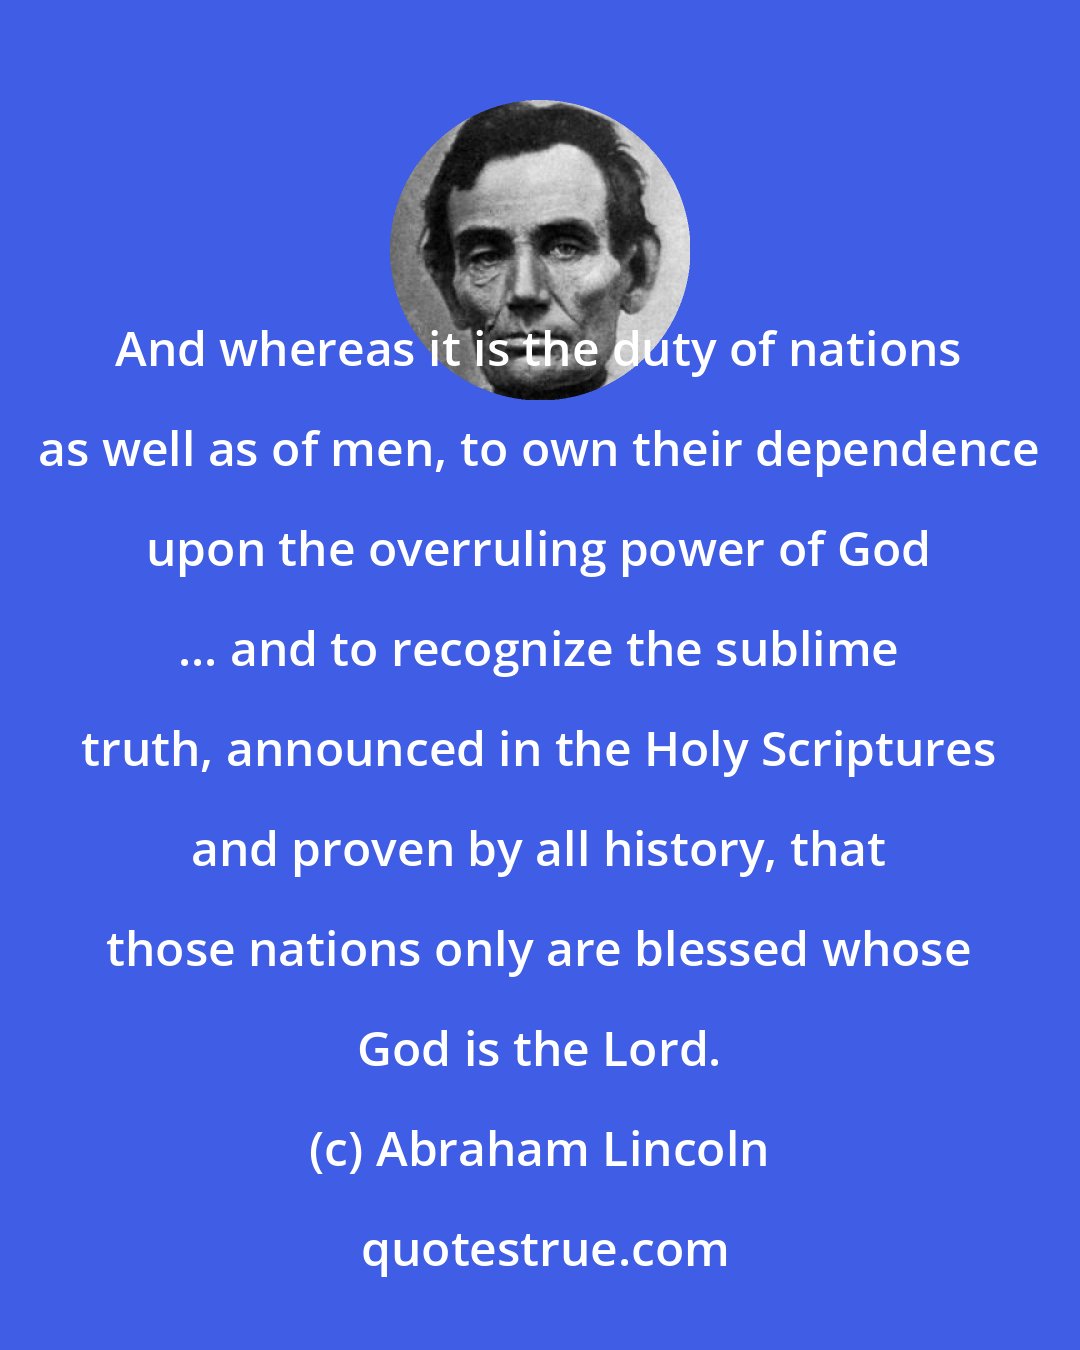 Abraham Lincoln: And whereas it is the duty of nations as well as of men, to own their dependence upon the overruling power of God ... and to recognize the sublime truth, announced in the Holy Scriptures and proven by all history, that those nations only are blessed whose God is the Lord.